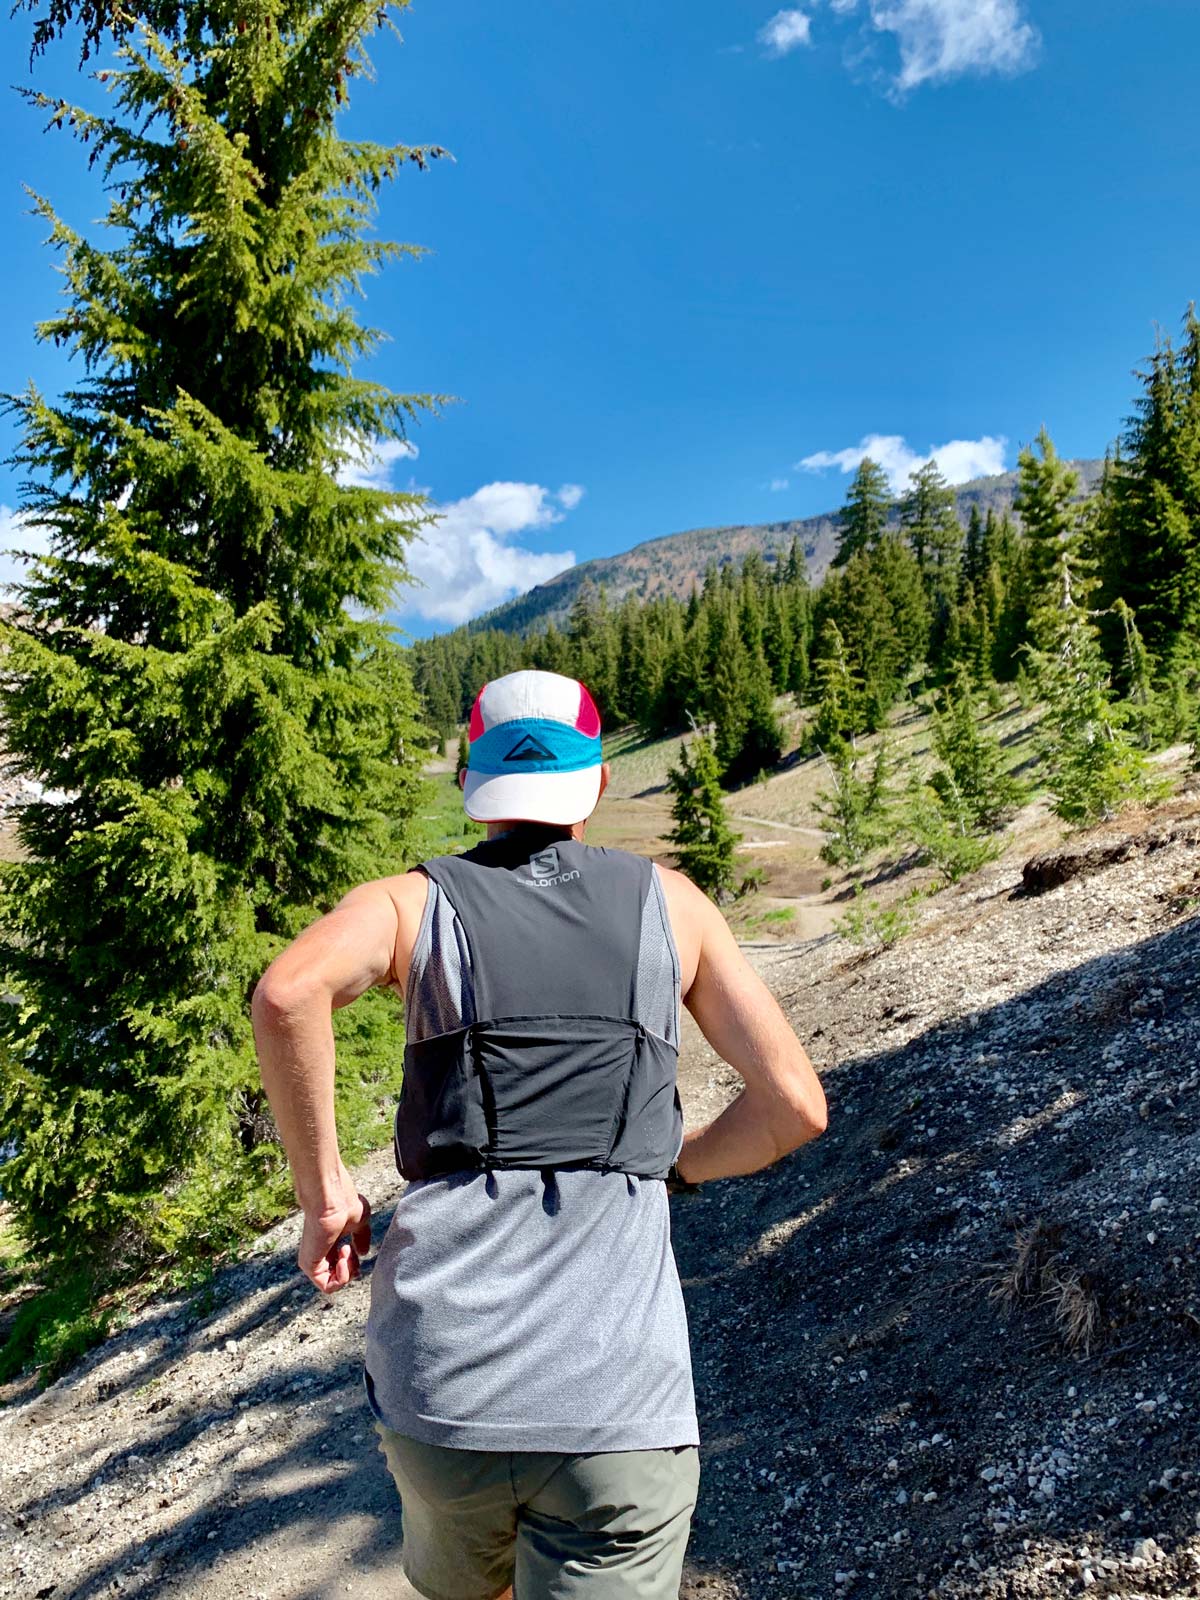 alastair running in Bend Oregon with Rokform Crystal Case in Hydration Vest pocket trail and kale